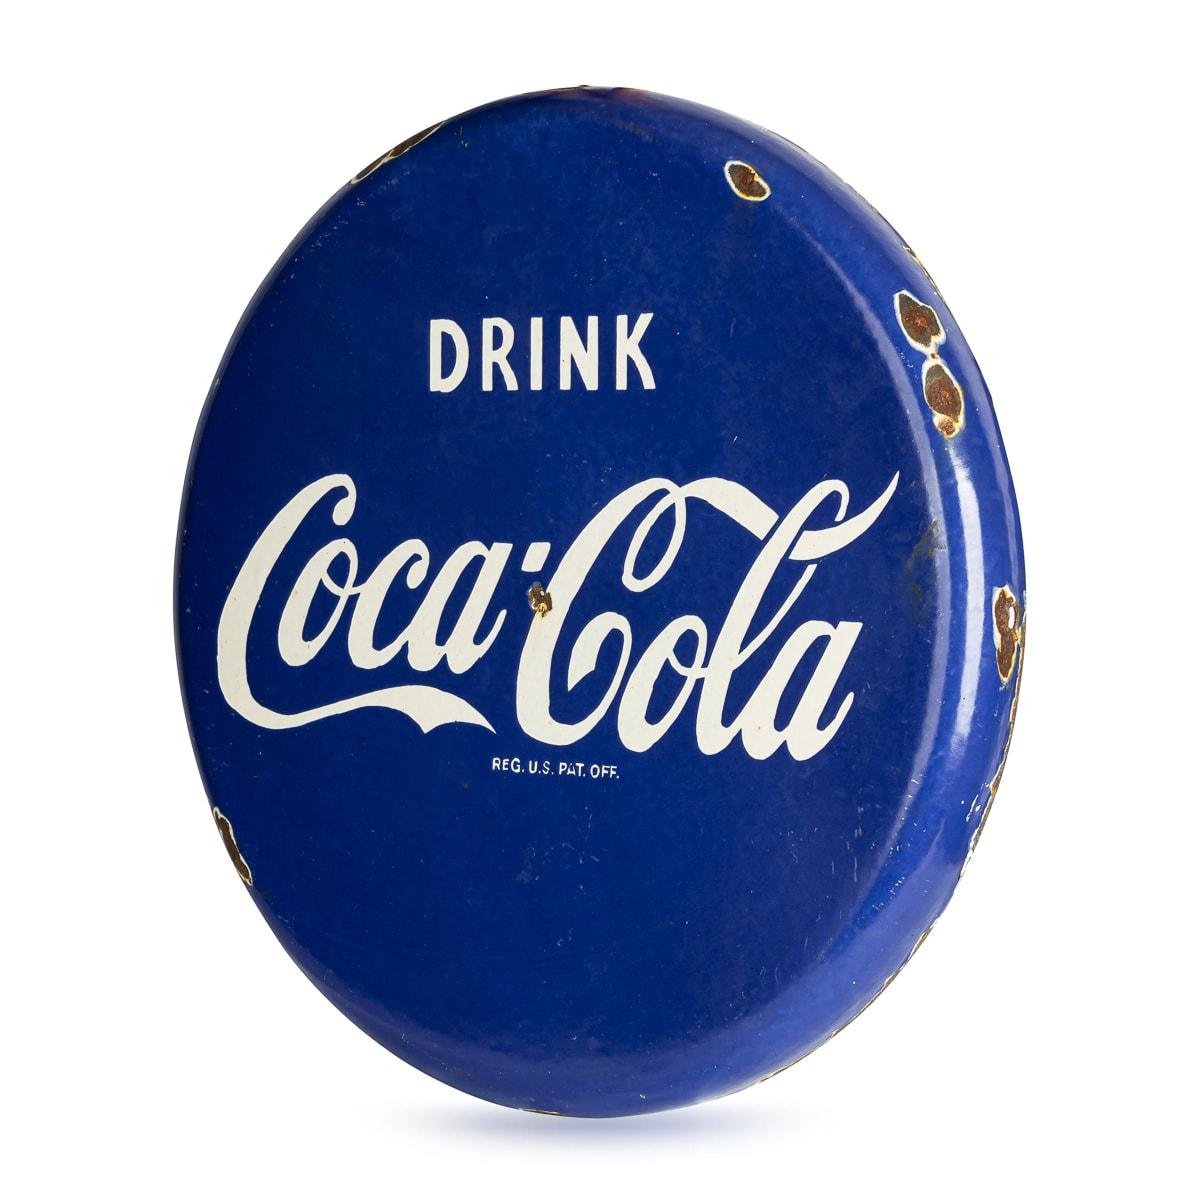 A splendid mid 20th Century blue Coca-Cola enamel advertising sign.

CONDITION
In Great Condition - Wear expected with age. Please refer to photographs. 

SIZE
Diameter: 47 cm // 18.50 in
Depth: 4 cm // 1.57 in

